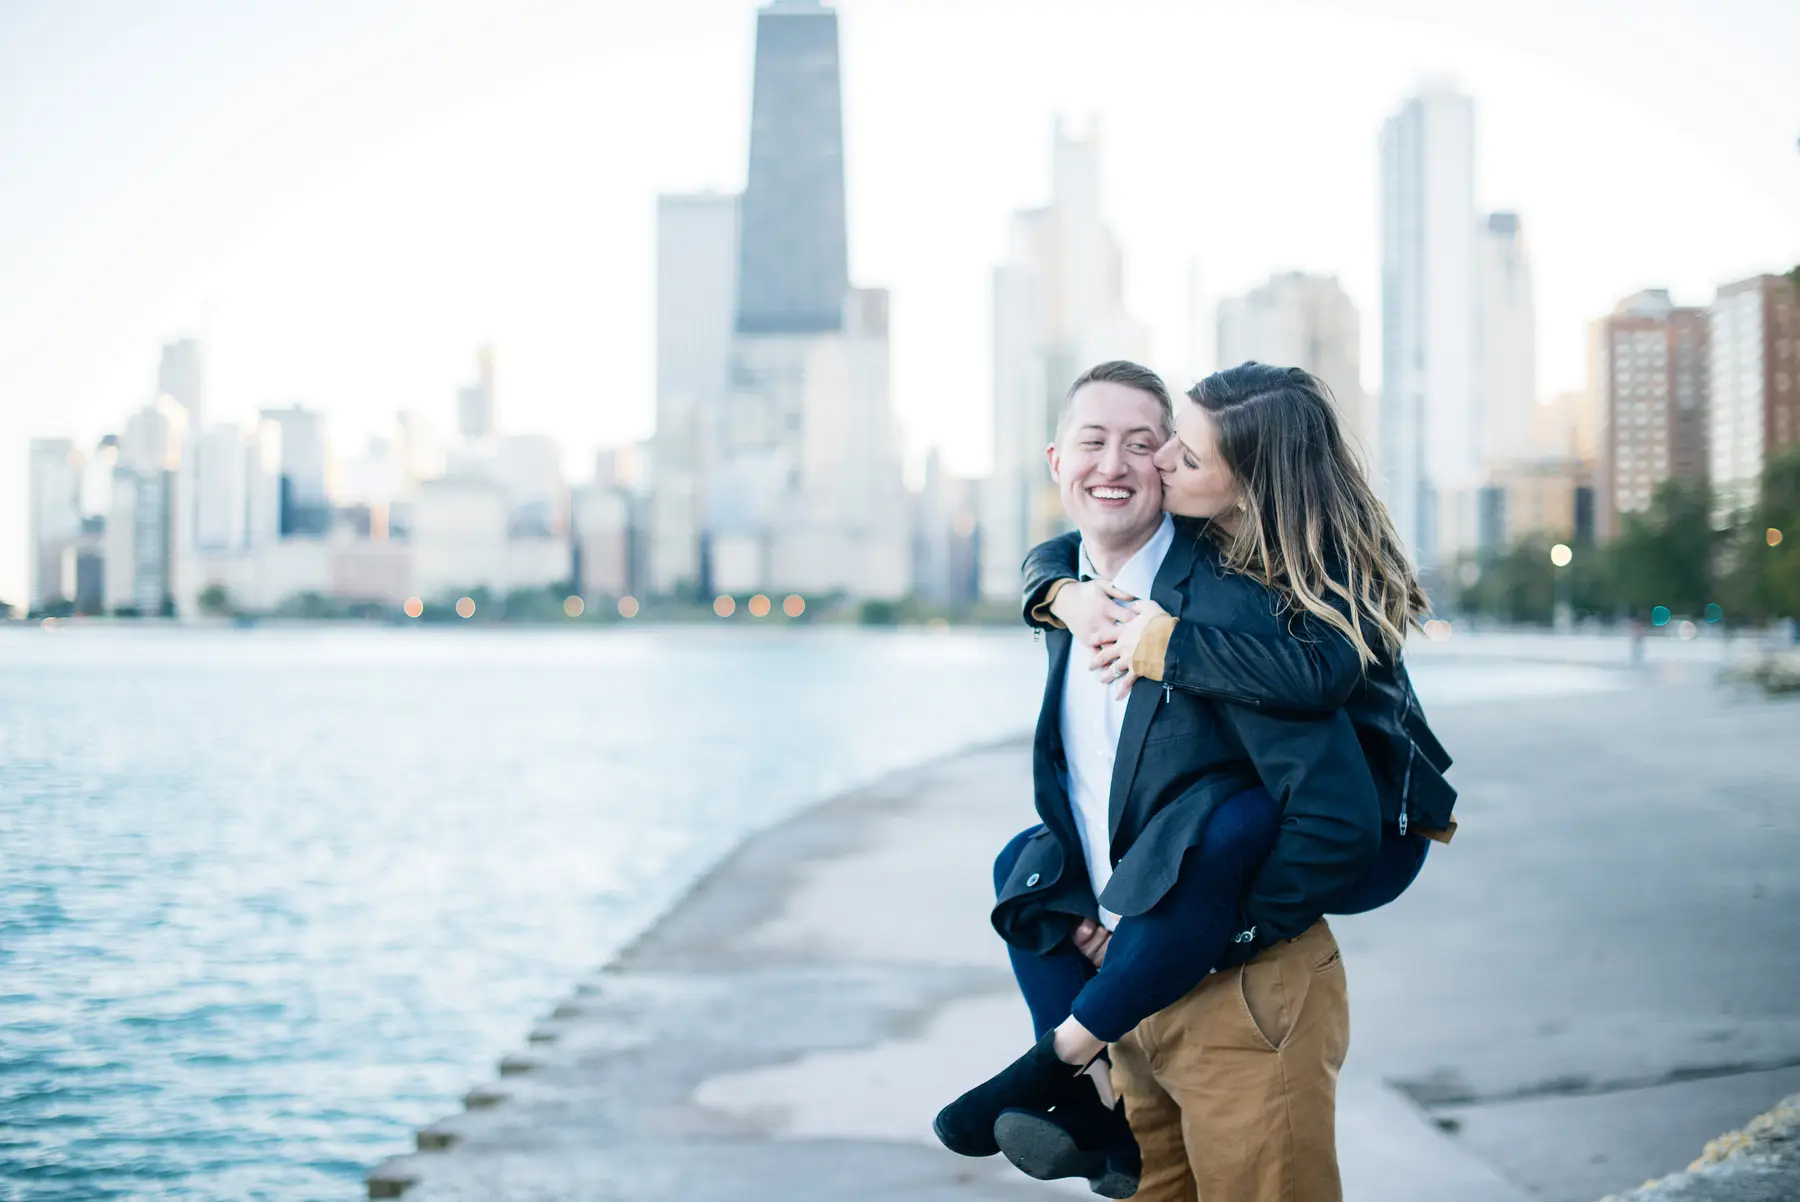 Kelly+Mark’s Fall Engagement Session in Chicago